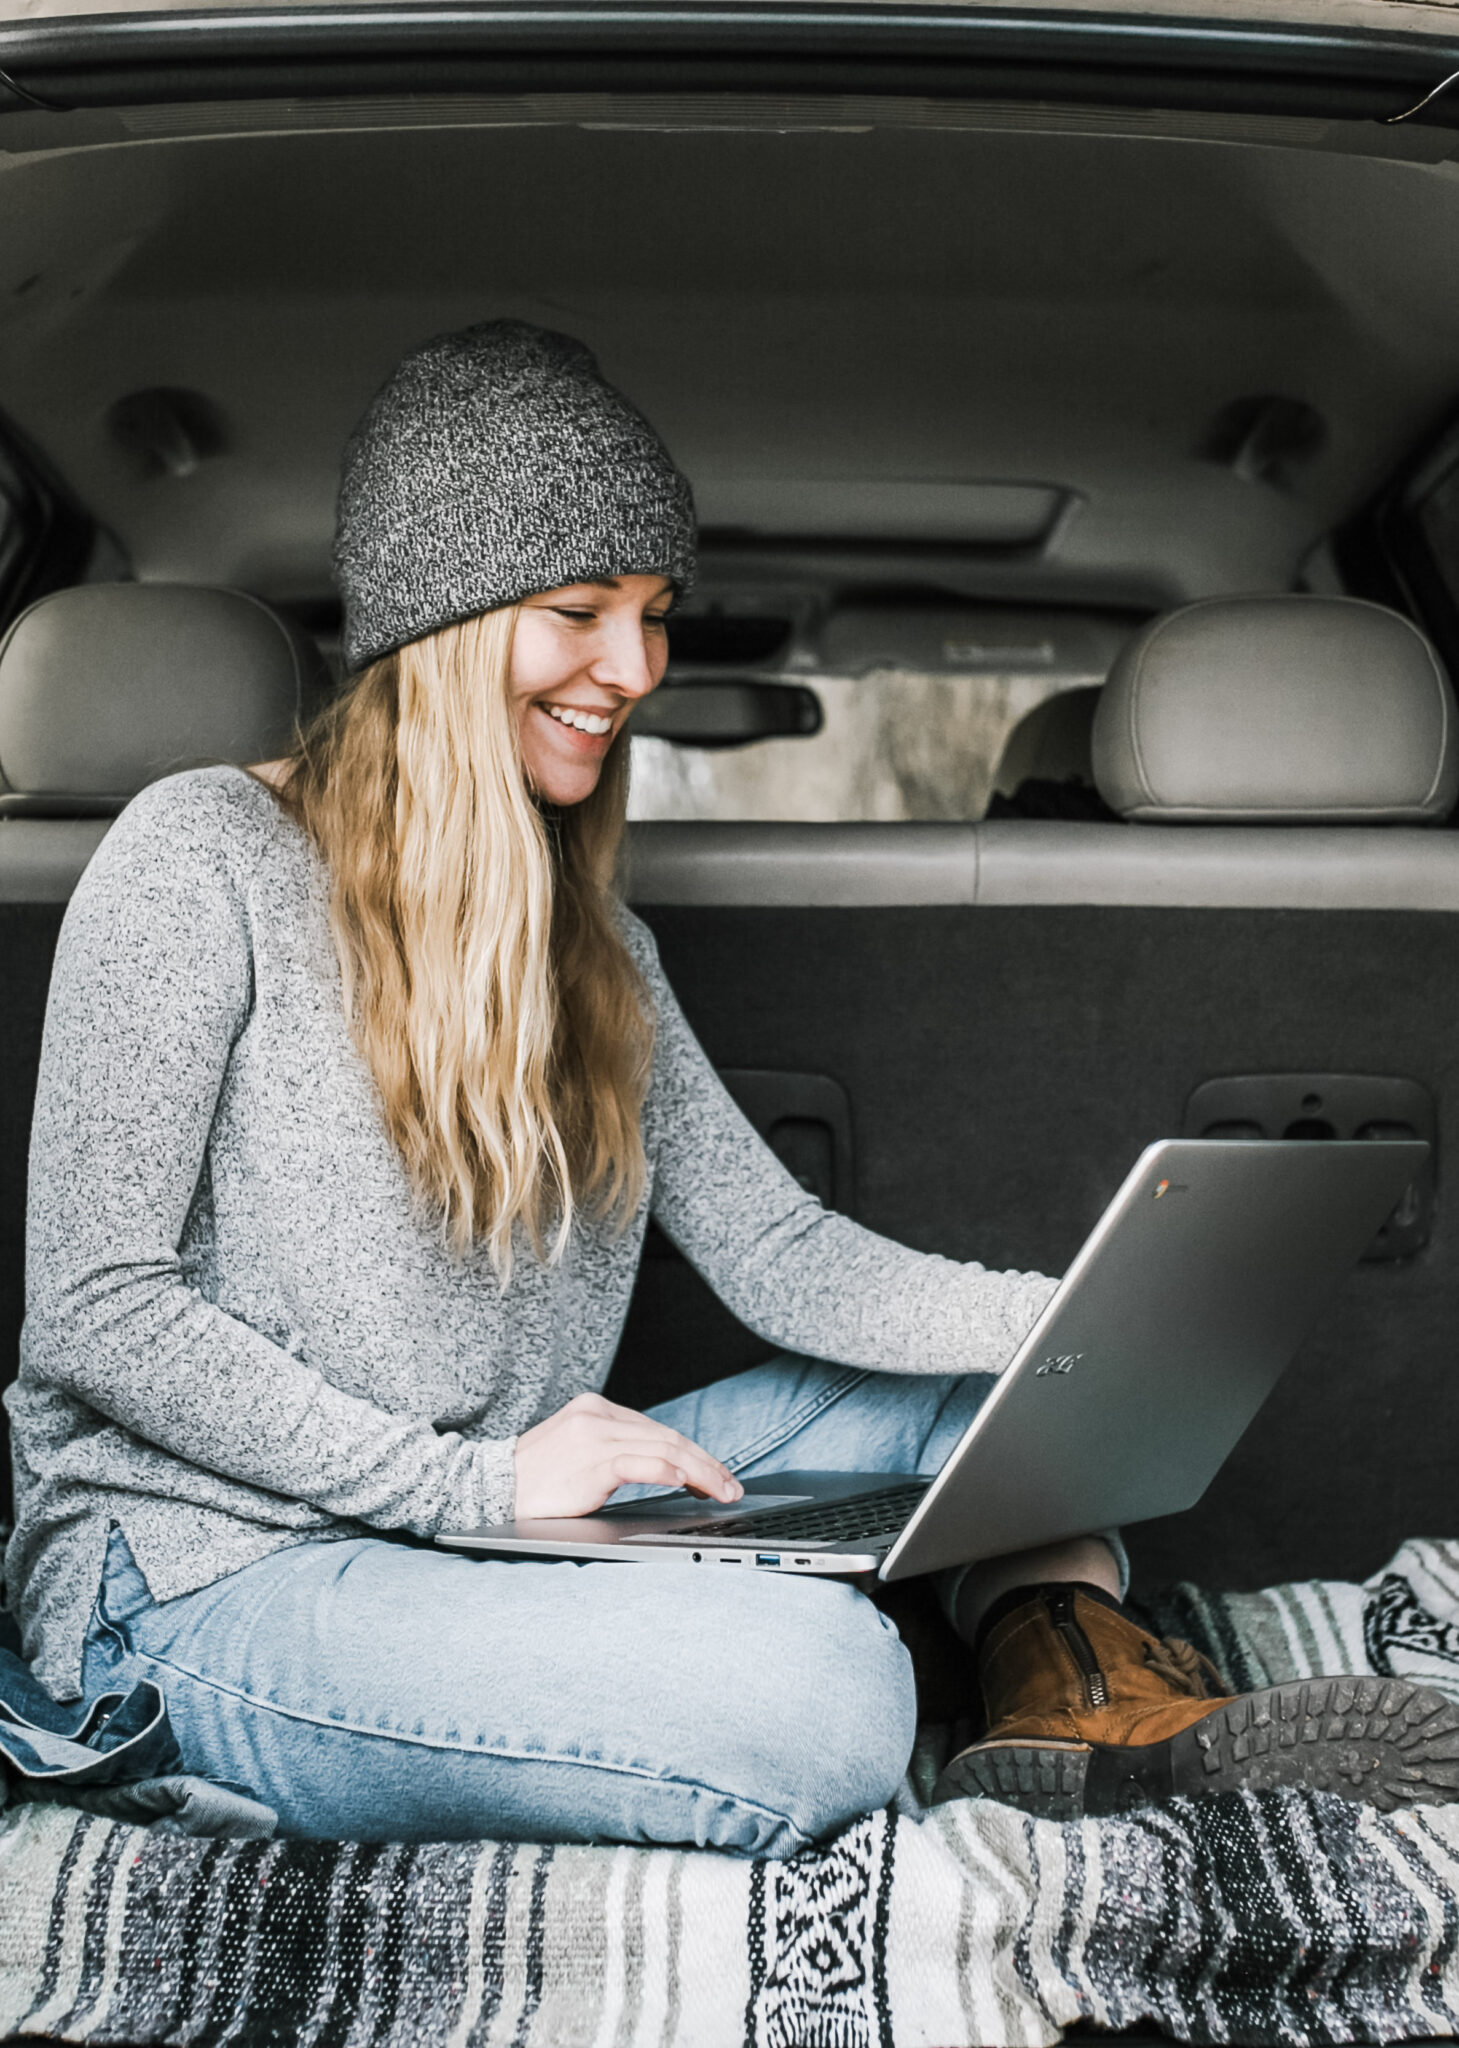 A girl wearing a beanie smiles and uses a laptop in the trunk of an SUV. This article covers ways to combine online studying and traveling in 2022.